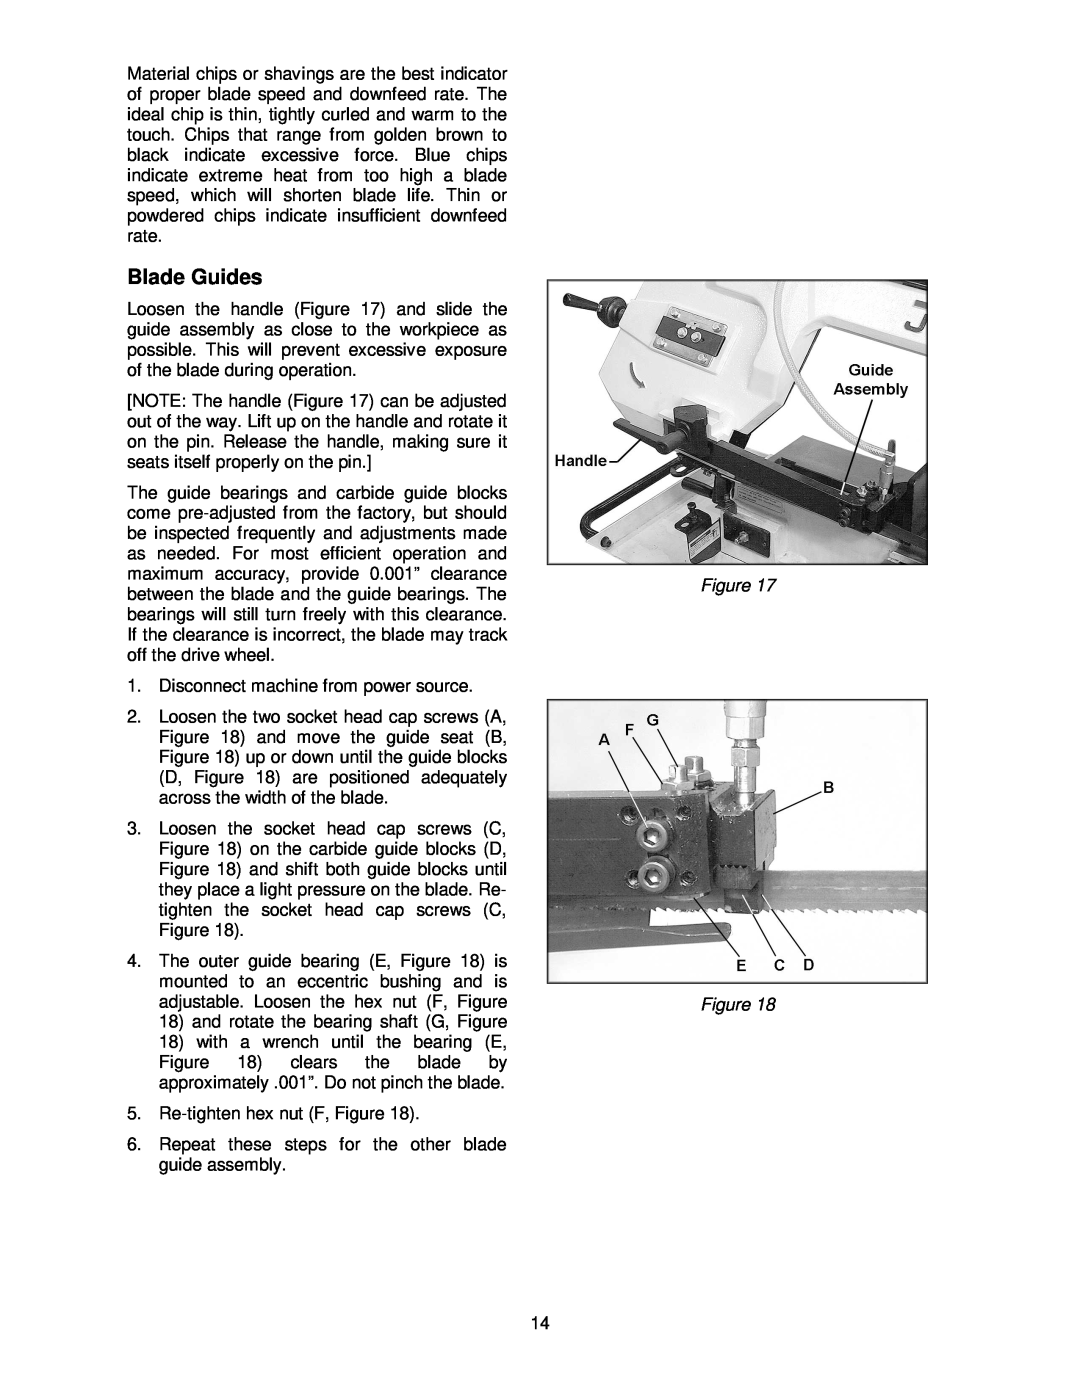 Jet Tools HBS-814GH operating instructions Blade Guides 